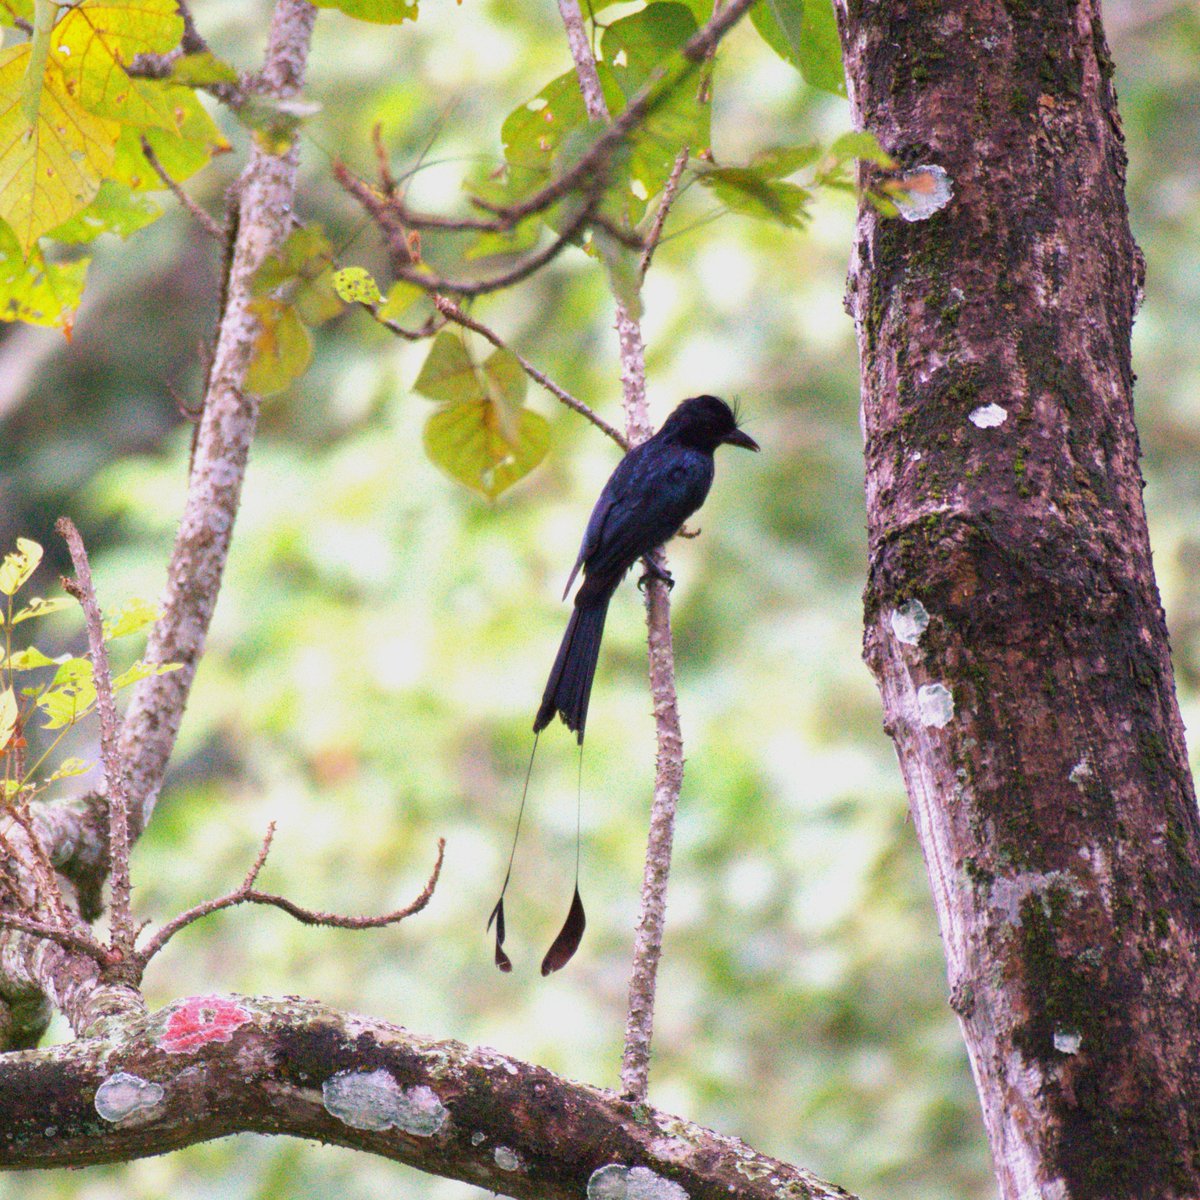 Greater Racket tailed drongo Interesting to watch this one along with it's companion foraging along with R. Treepies and Green Malkohas and bulling rest of the birds. #IndiAves #TwitterNatureCommunity #NaturePhotography #birding #birdwatching #Assam